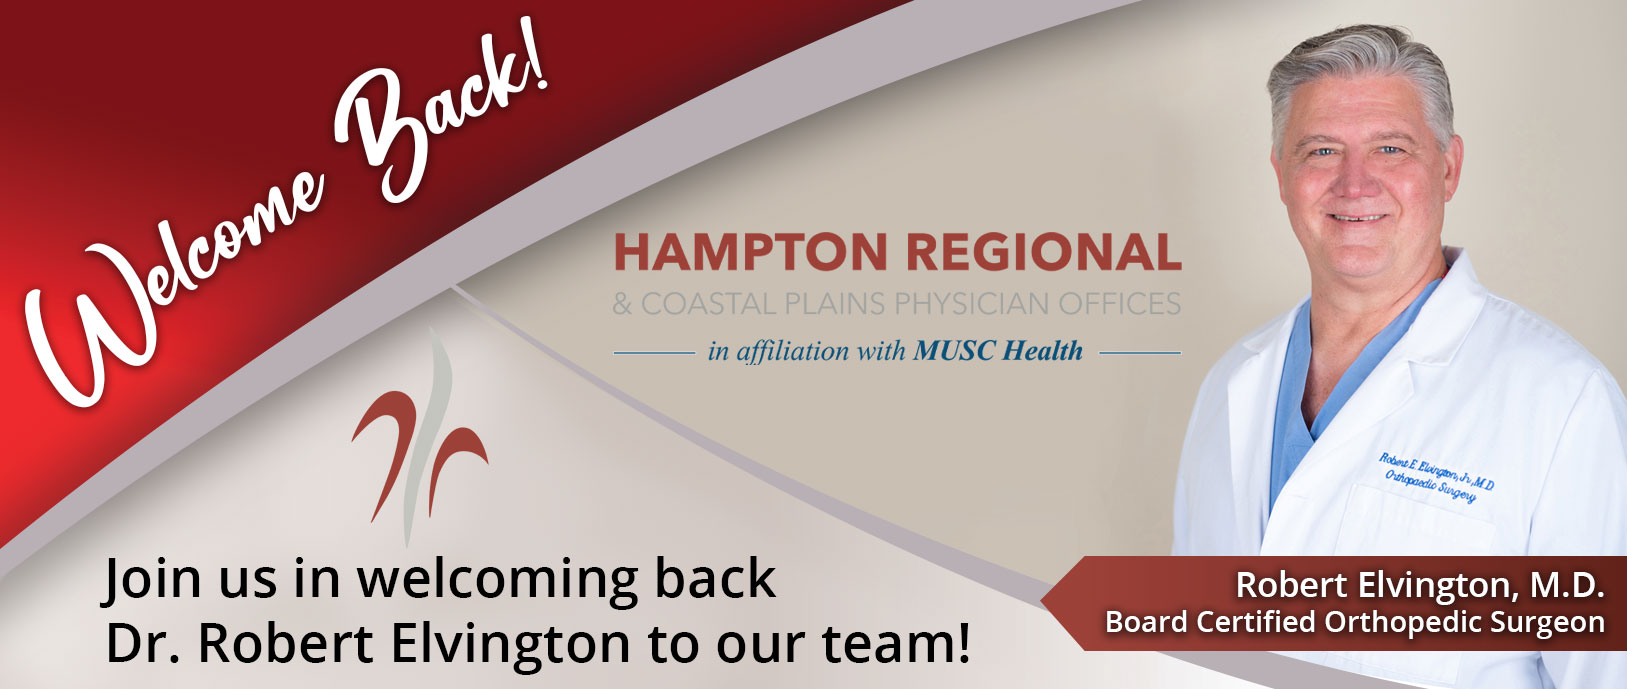 Banner picture of smiling Dr. Robert Elvington. Banner says:

Welcome Back!
Join us in welcoming back Dr. Robert Elvington to our team!
-Robert Elvington, M.D. Board Certified Orthopedic Surgeon

HAMPTON REGIONAL & COASTAL PLAINS PHYSICIAN OFFICES
-in affiliation with MUSC Health-